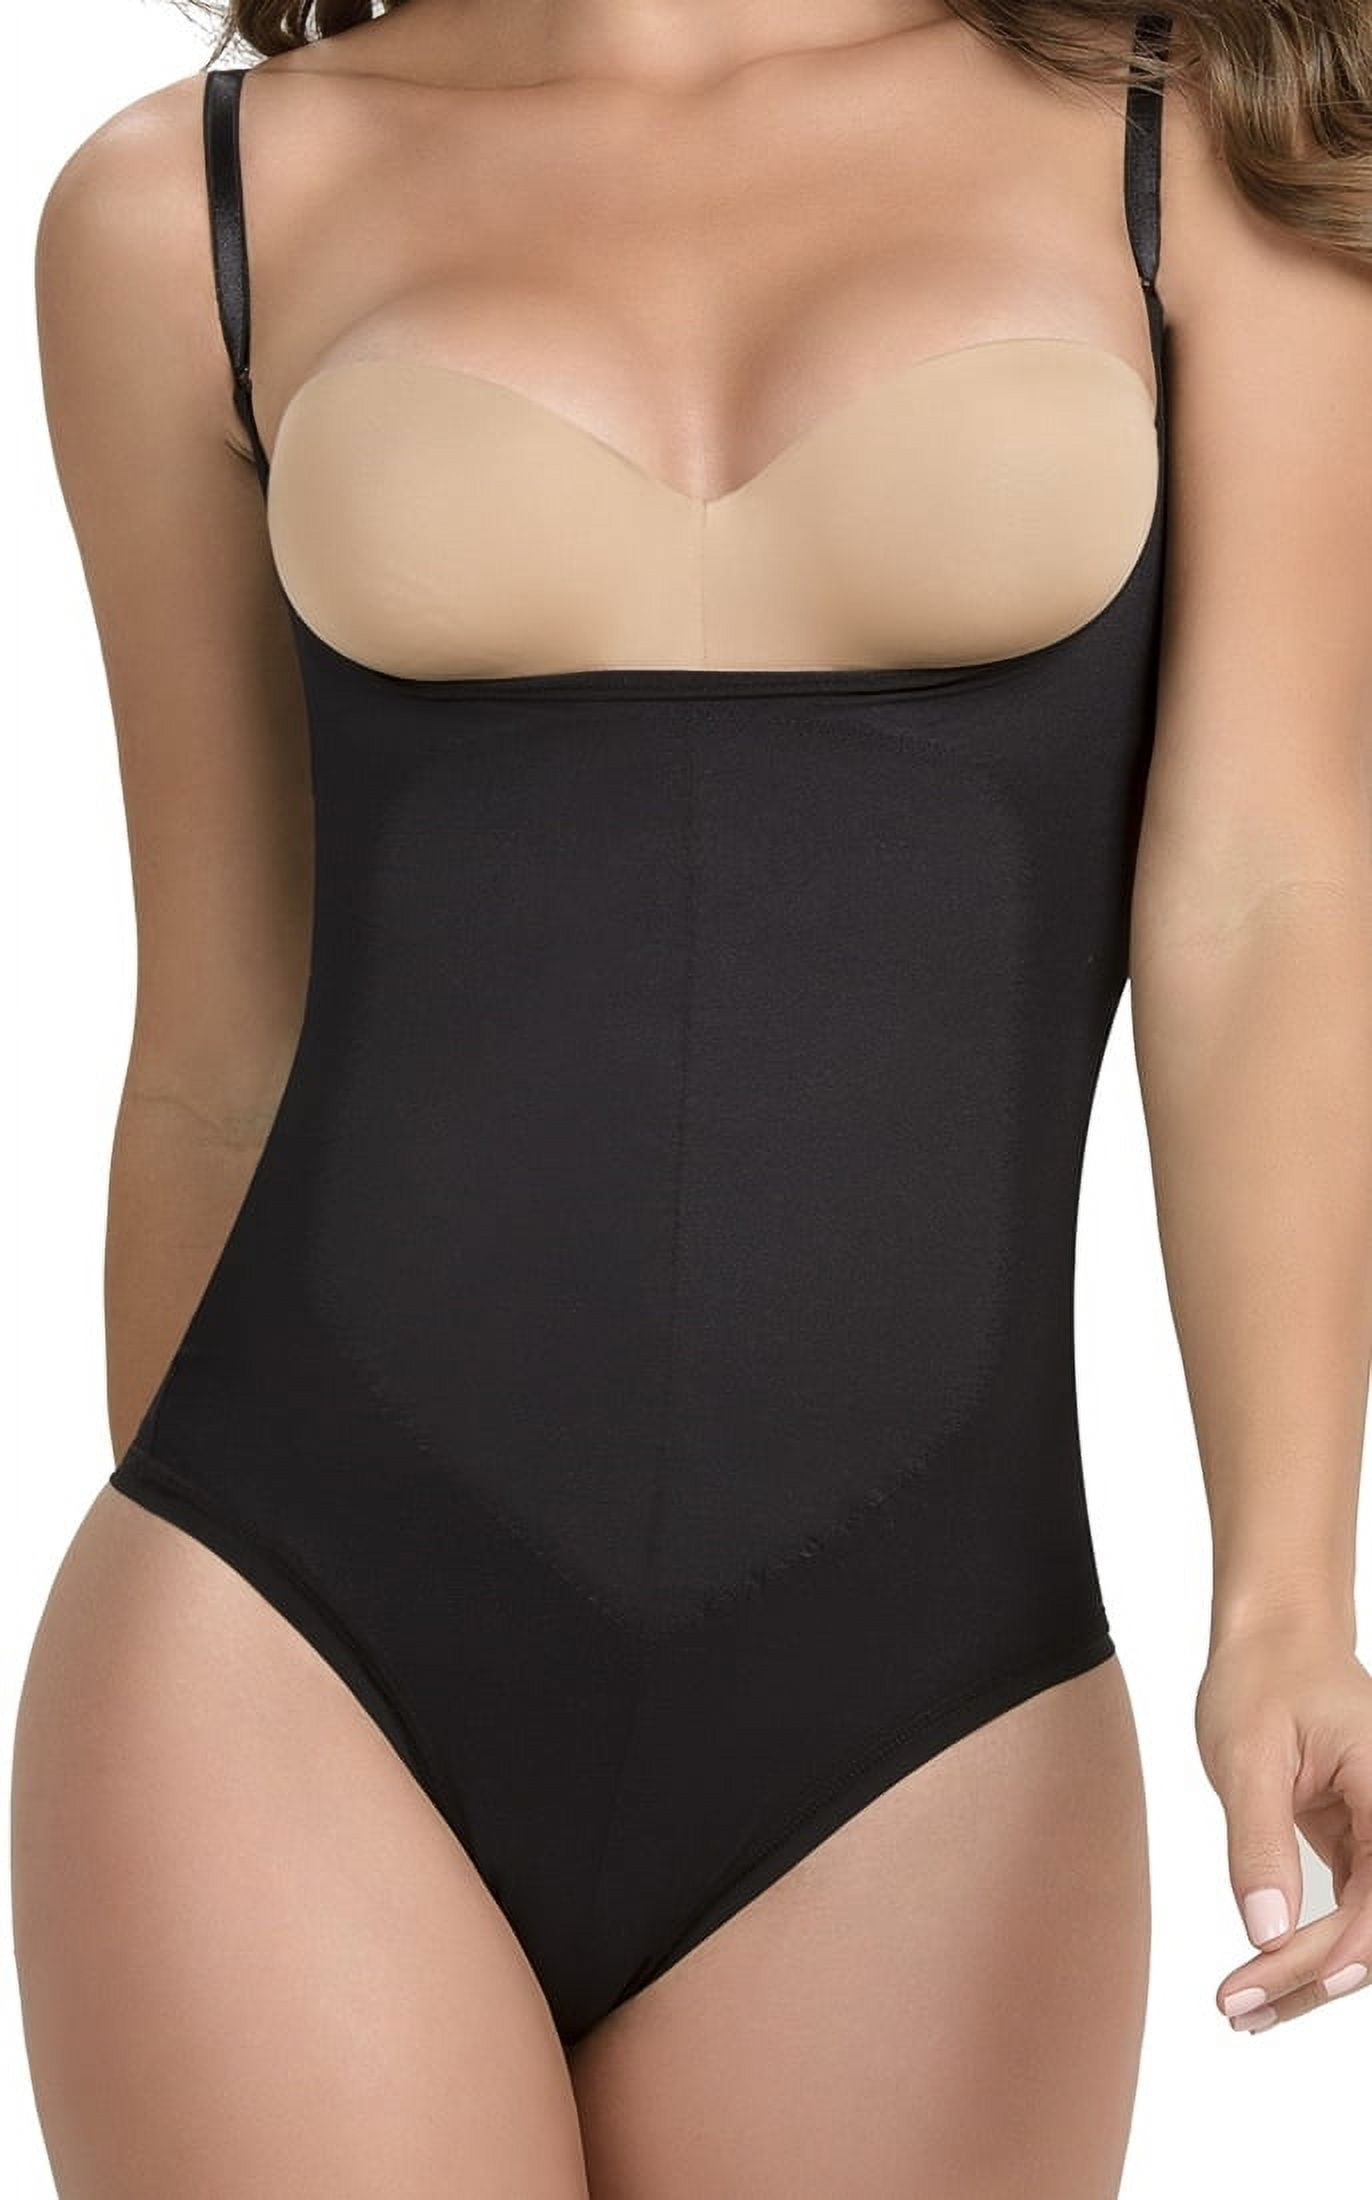 Fajas Colombianas Body Suit Thong Woman Girdle Thermal Shaper Post